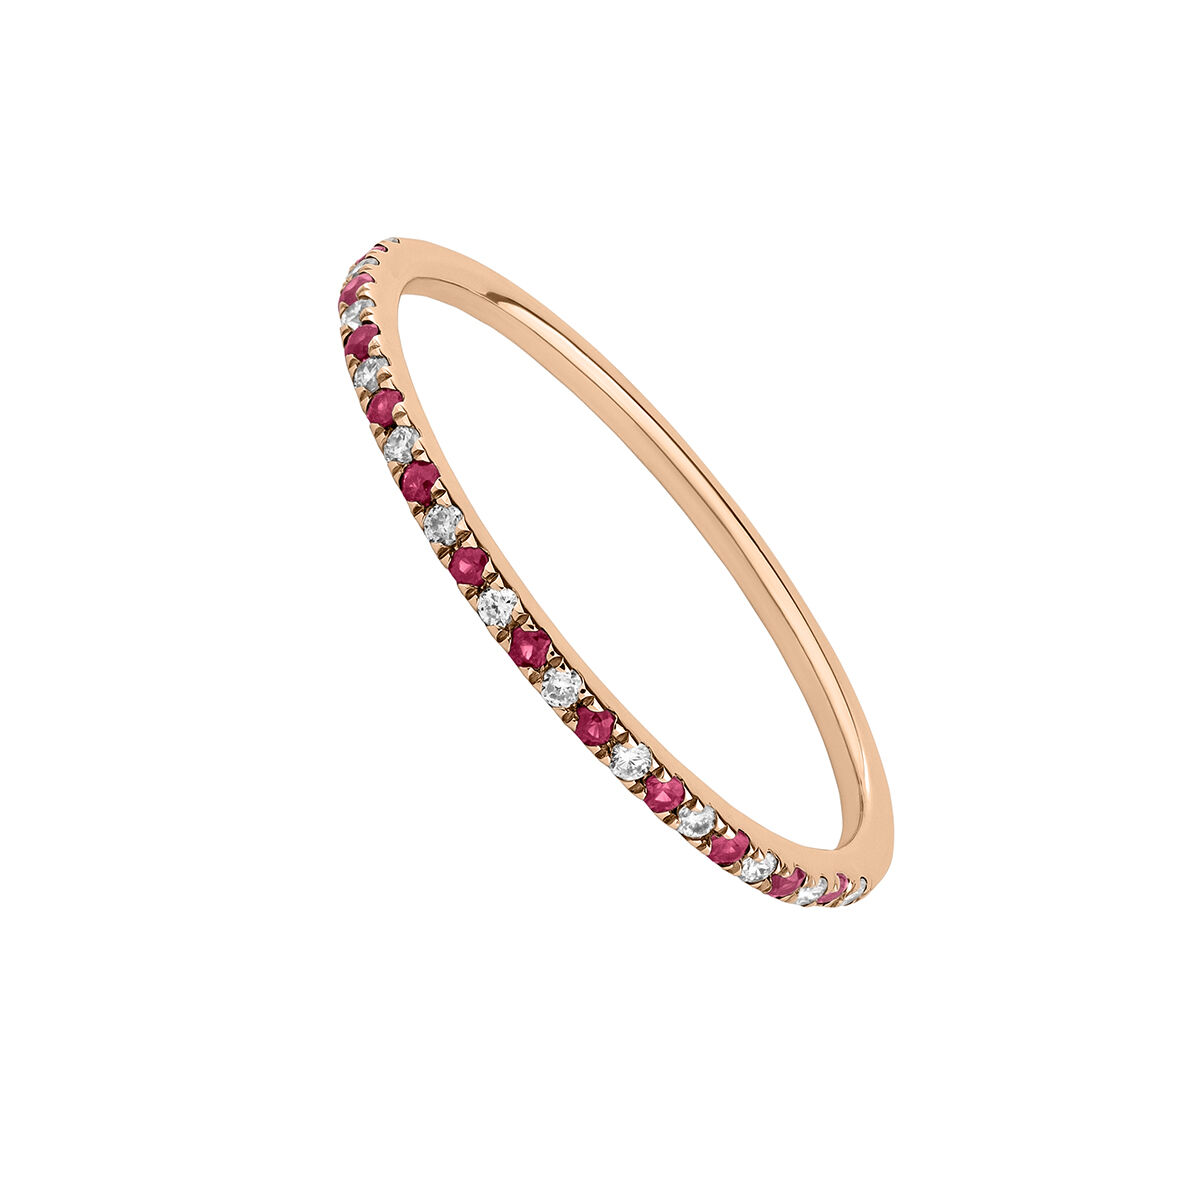 Ring in 9k rose gold with red rubies and diamonds, J05049-03-RU, hi-res